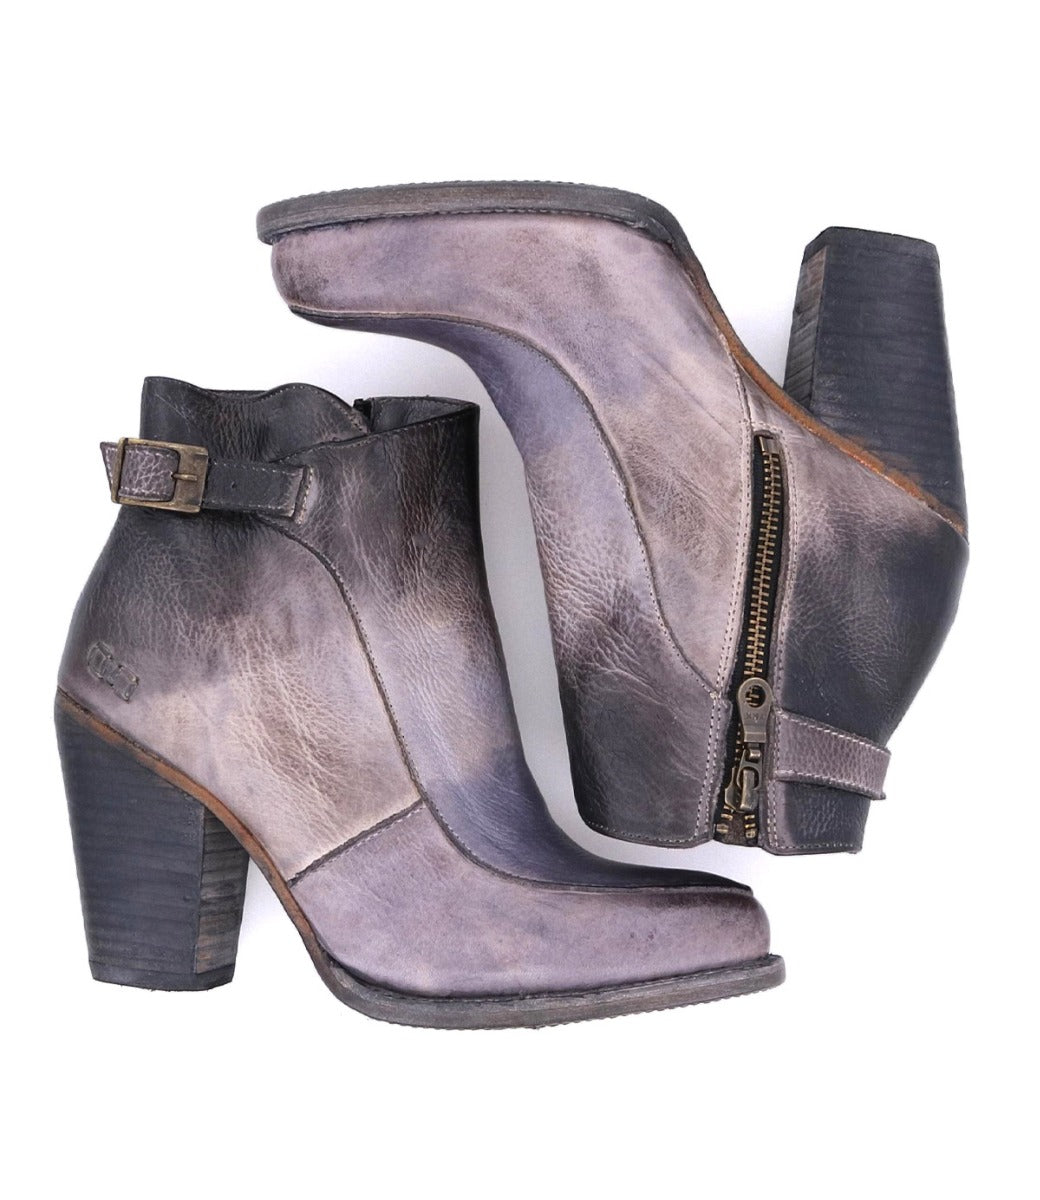 A pair of Isla grey leather ankle boots with a zipper by Bed Stu.